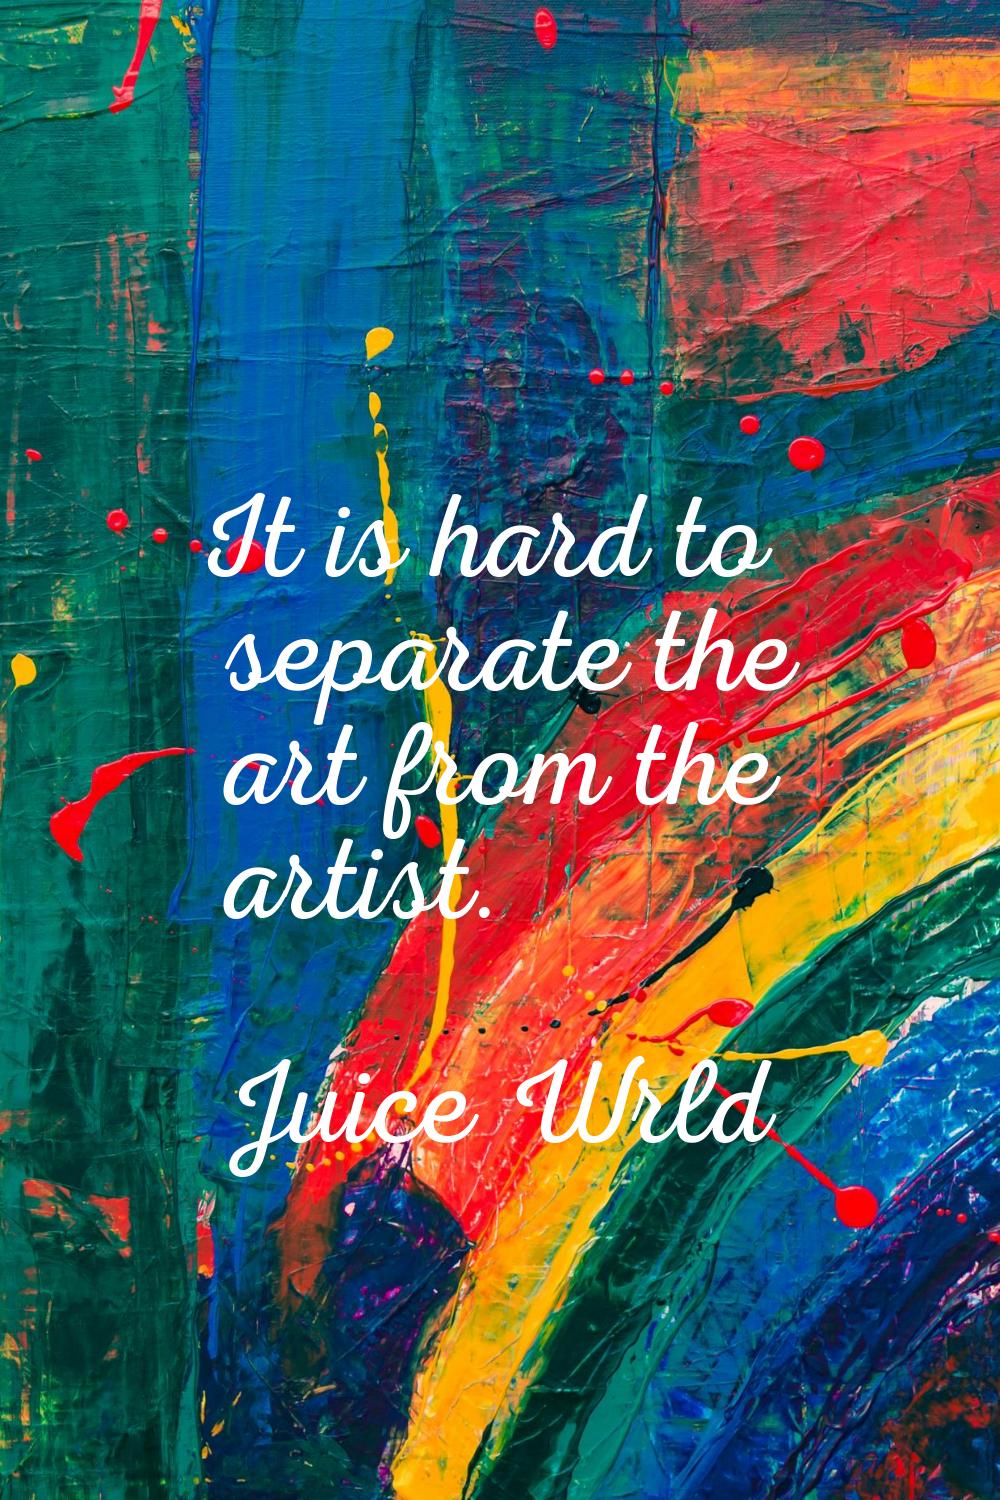 It is hard to separate the art from the artist.